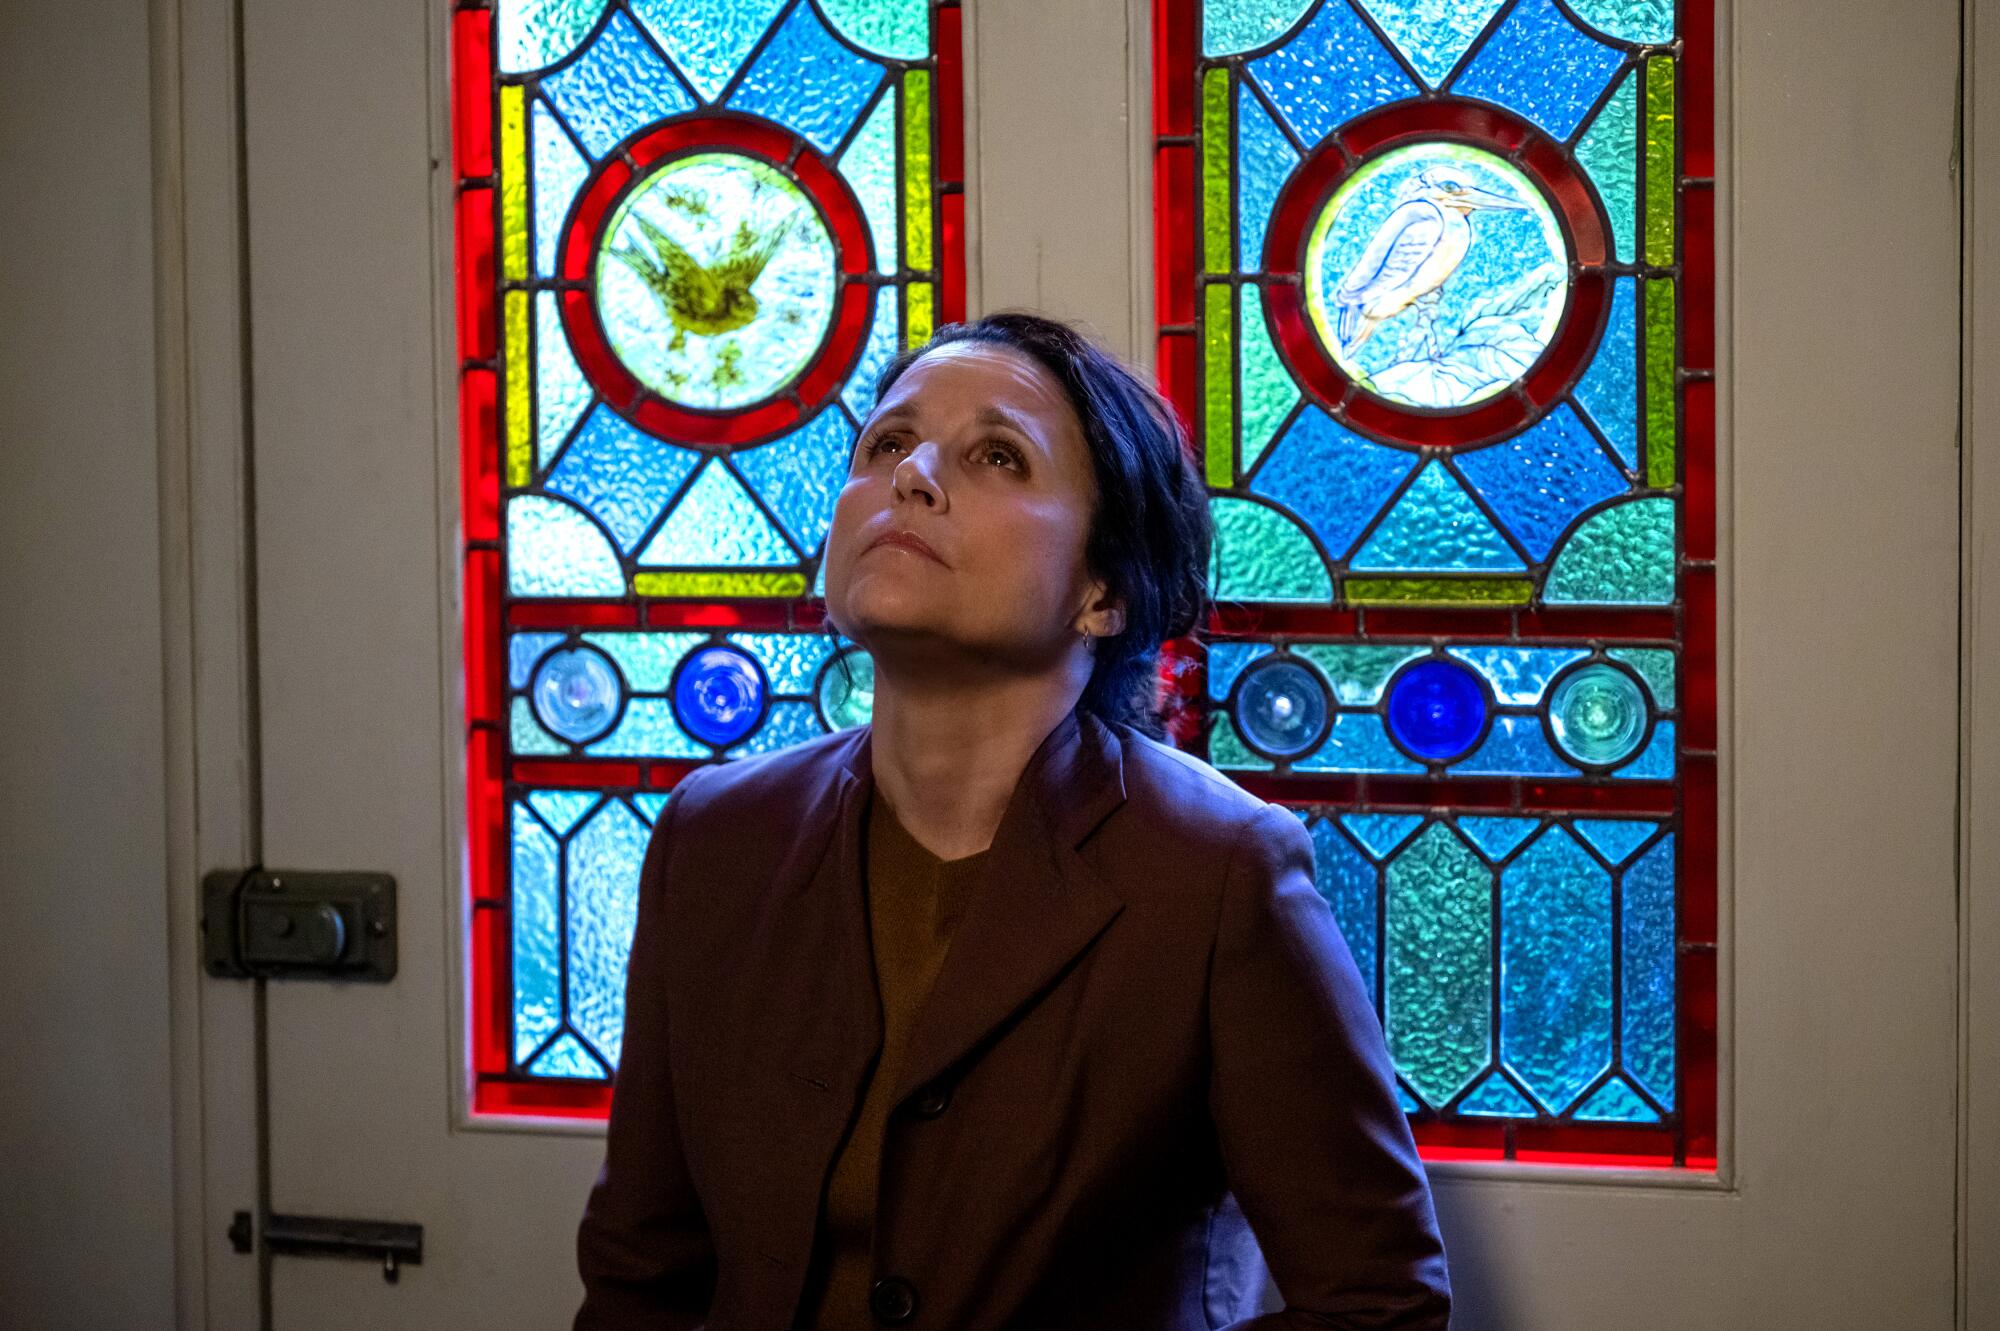 A grieving woman stares upward, a stained-glass window behind her